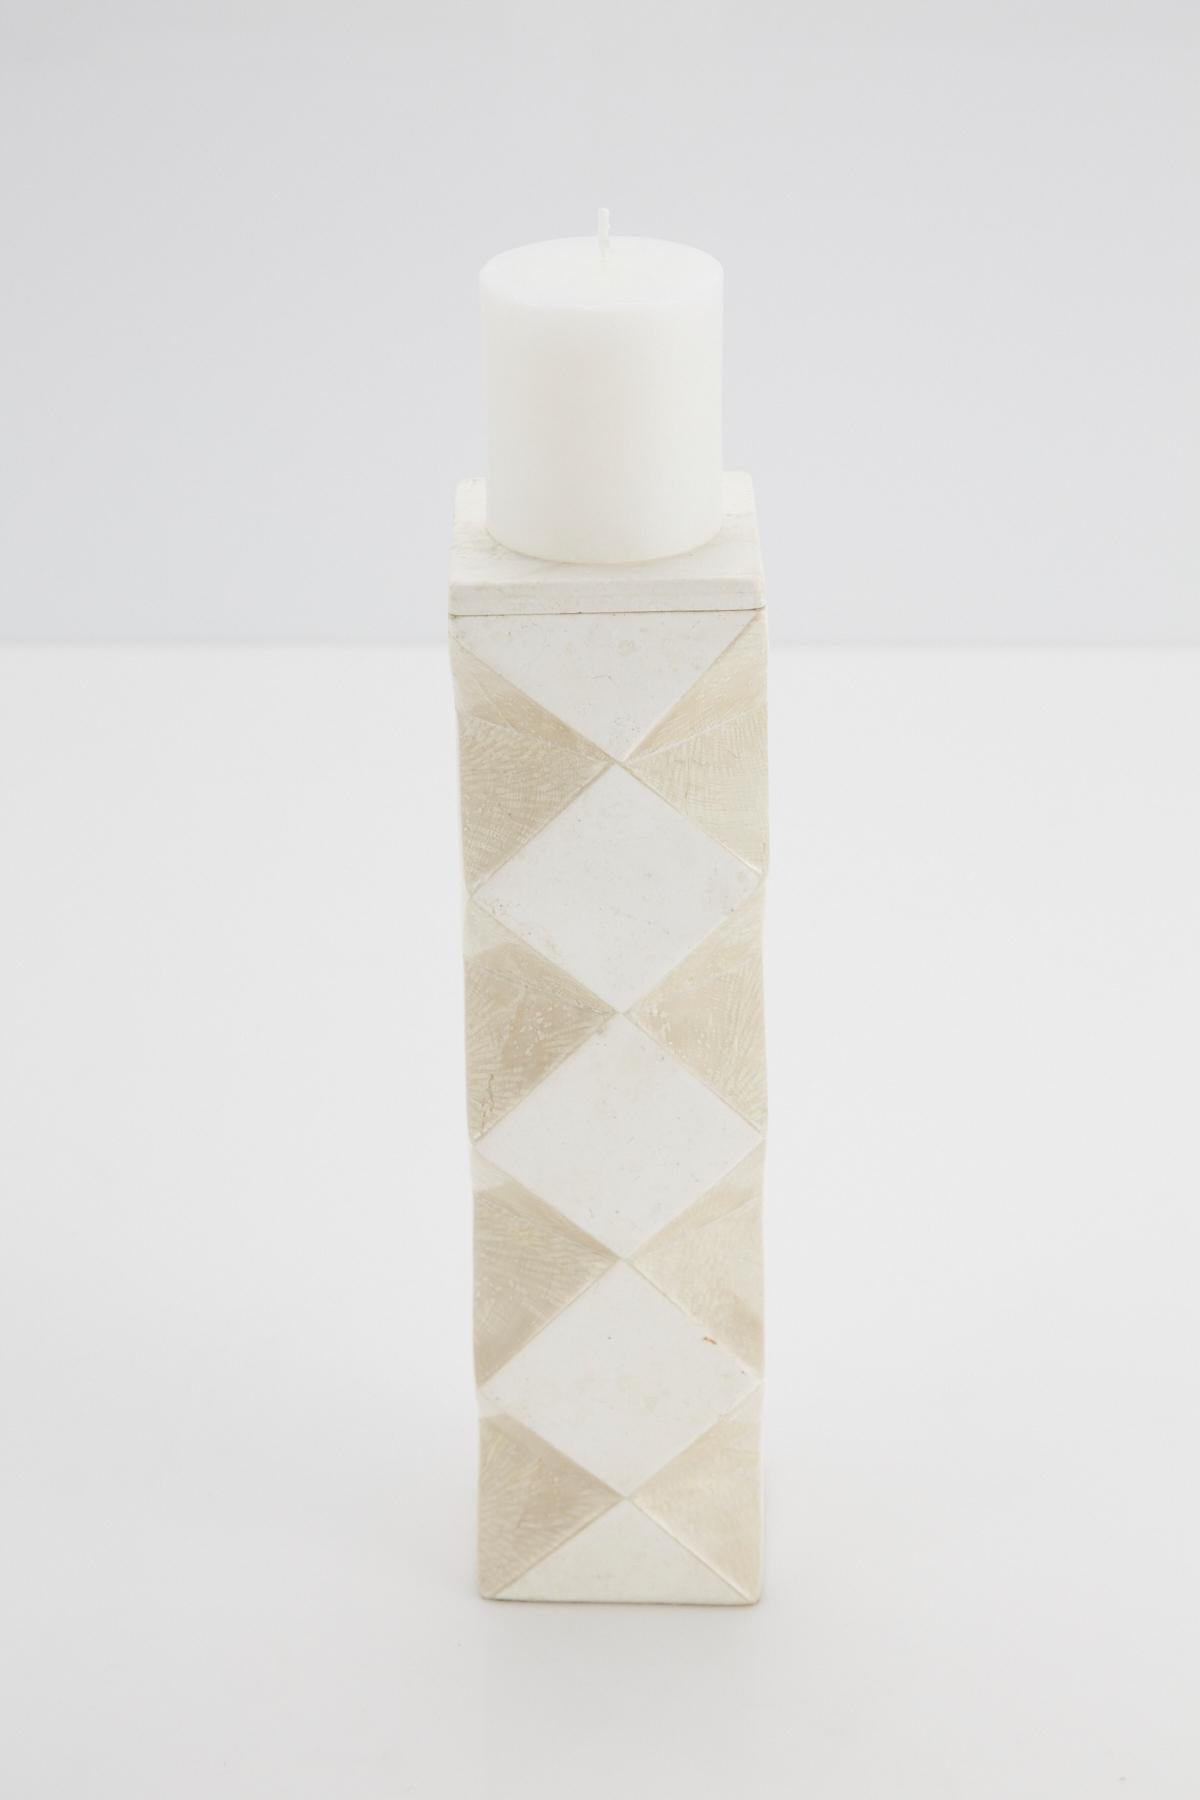 Minimalist Convertible Faceted Postmodern Tessellated Stone Candlestick or Vase, 1990s For Sale